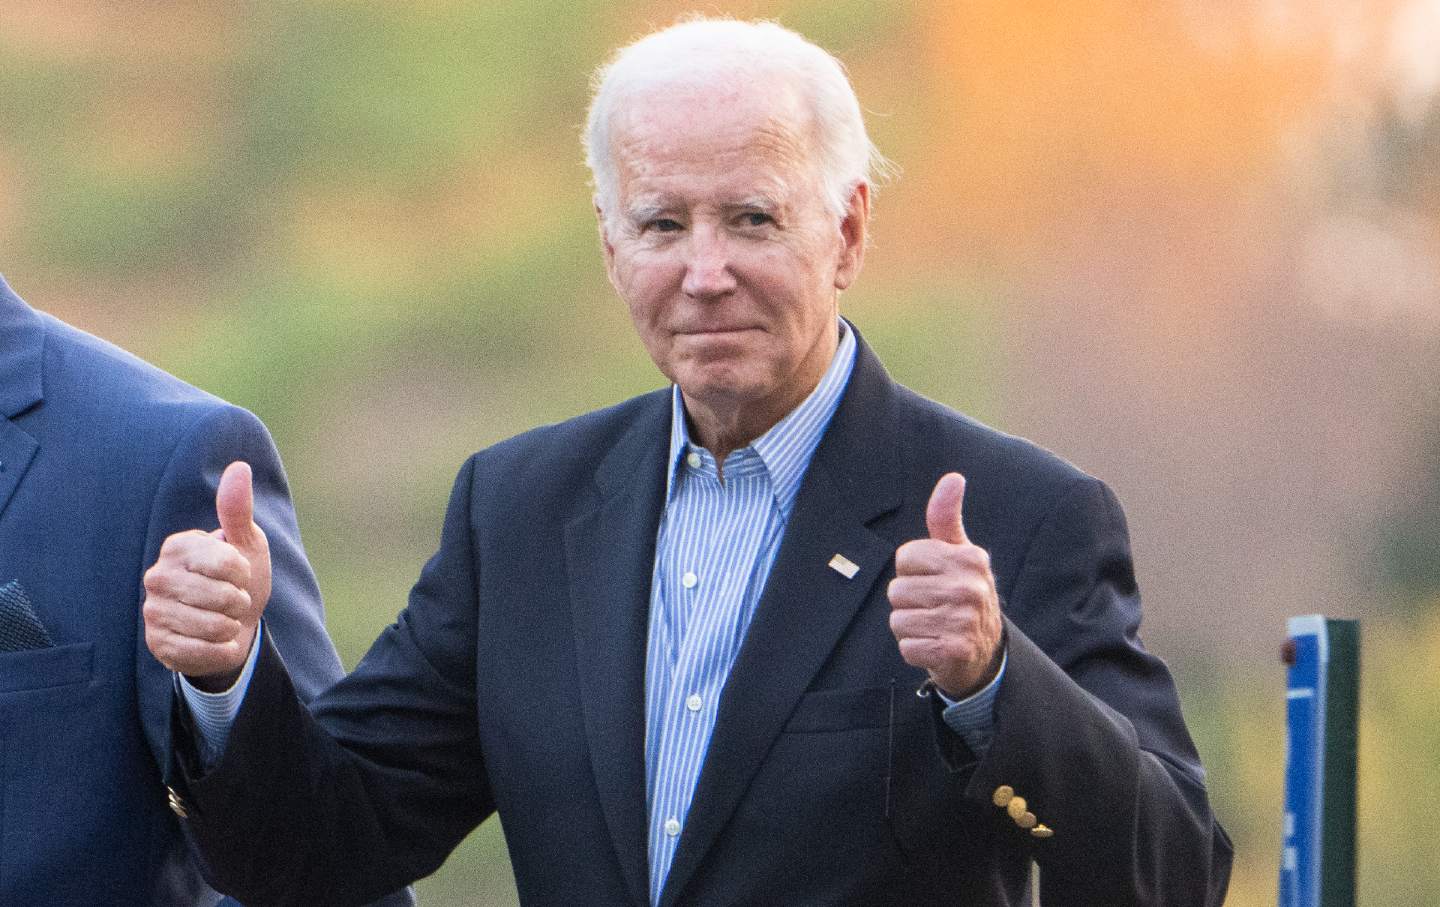 President Joe Biden gives two thumbs up as he leaves St. Joseph on the Brandywine Catholic Church in Wilmington, Del., on October 28, 2023.